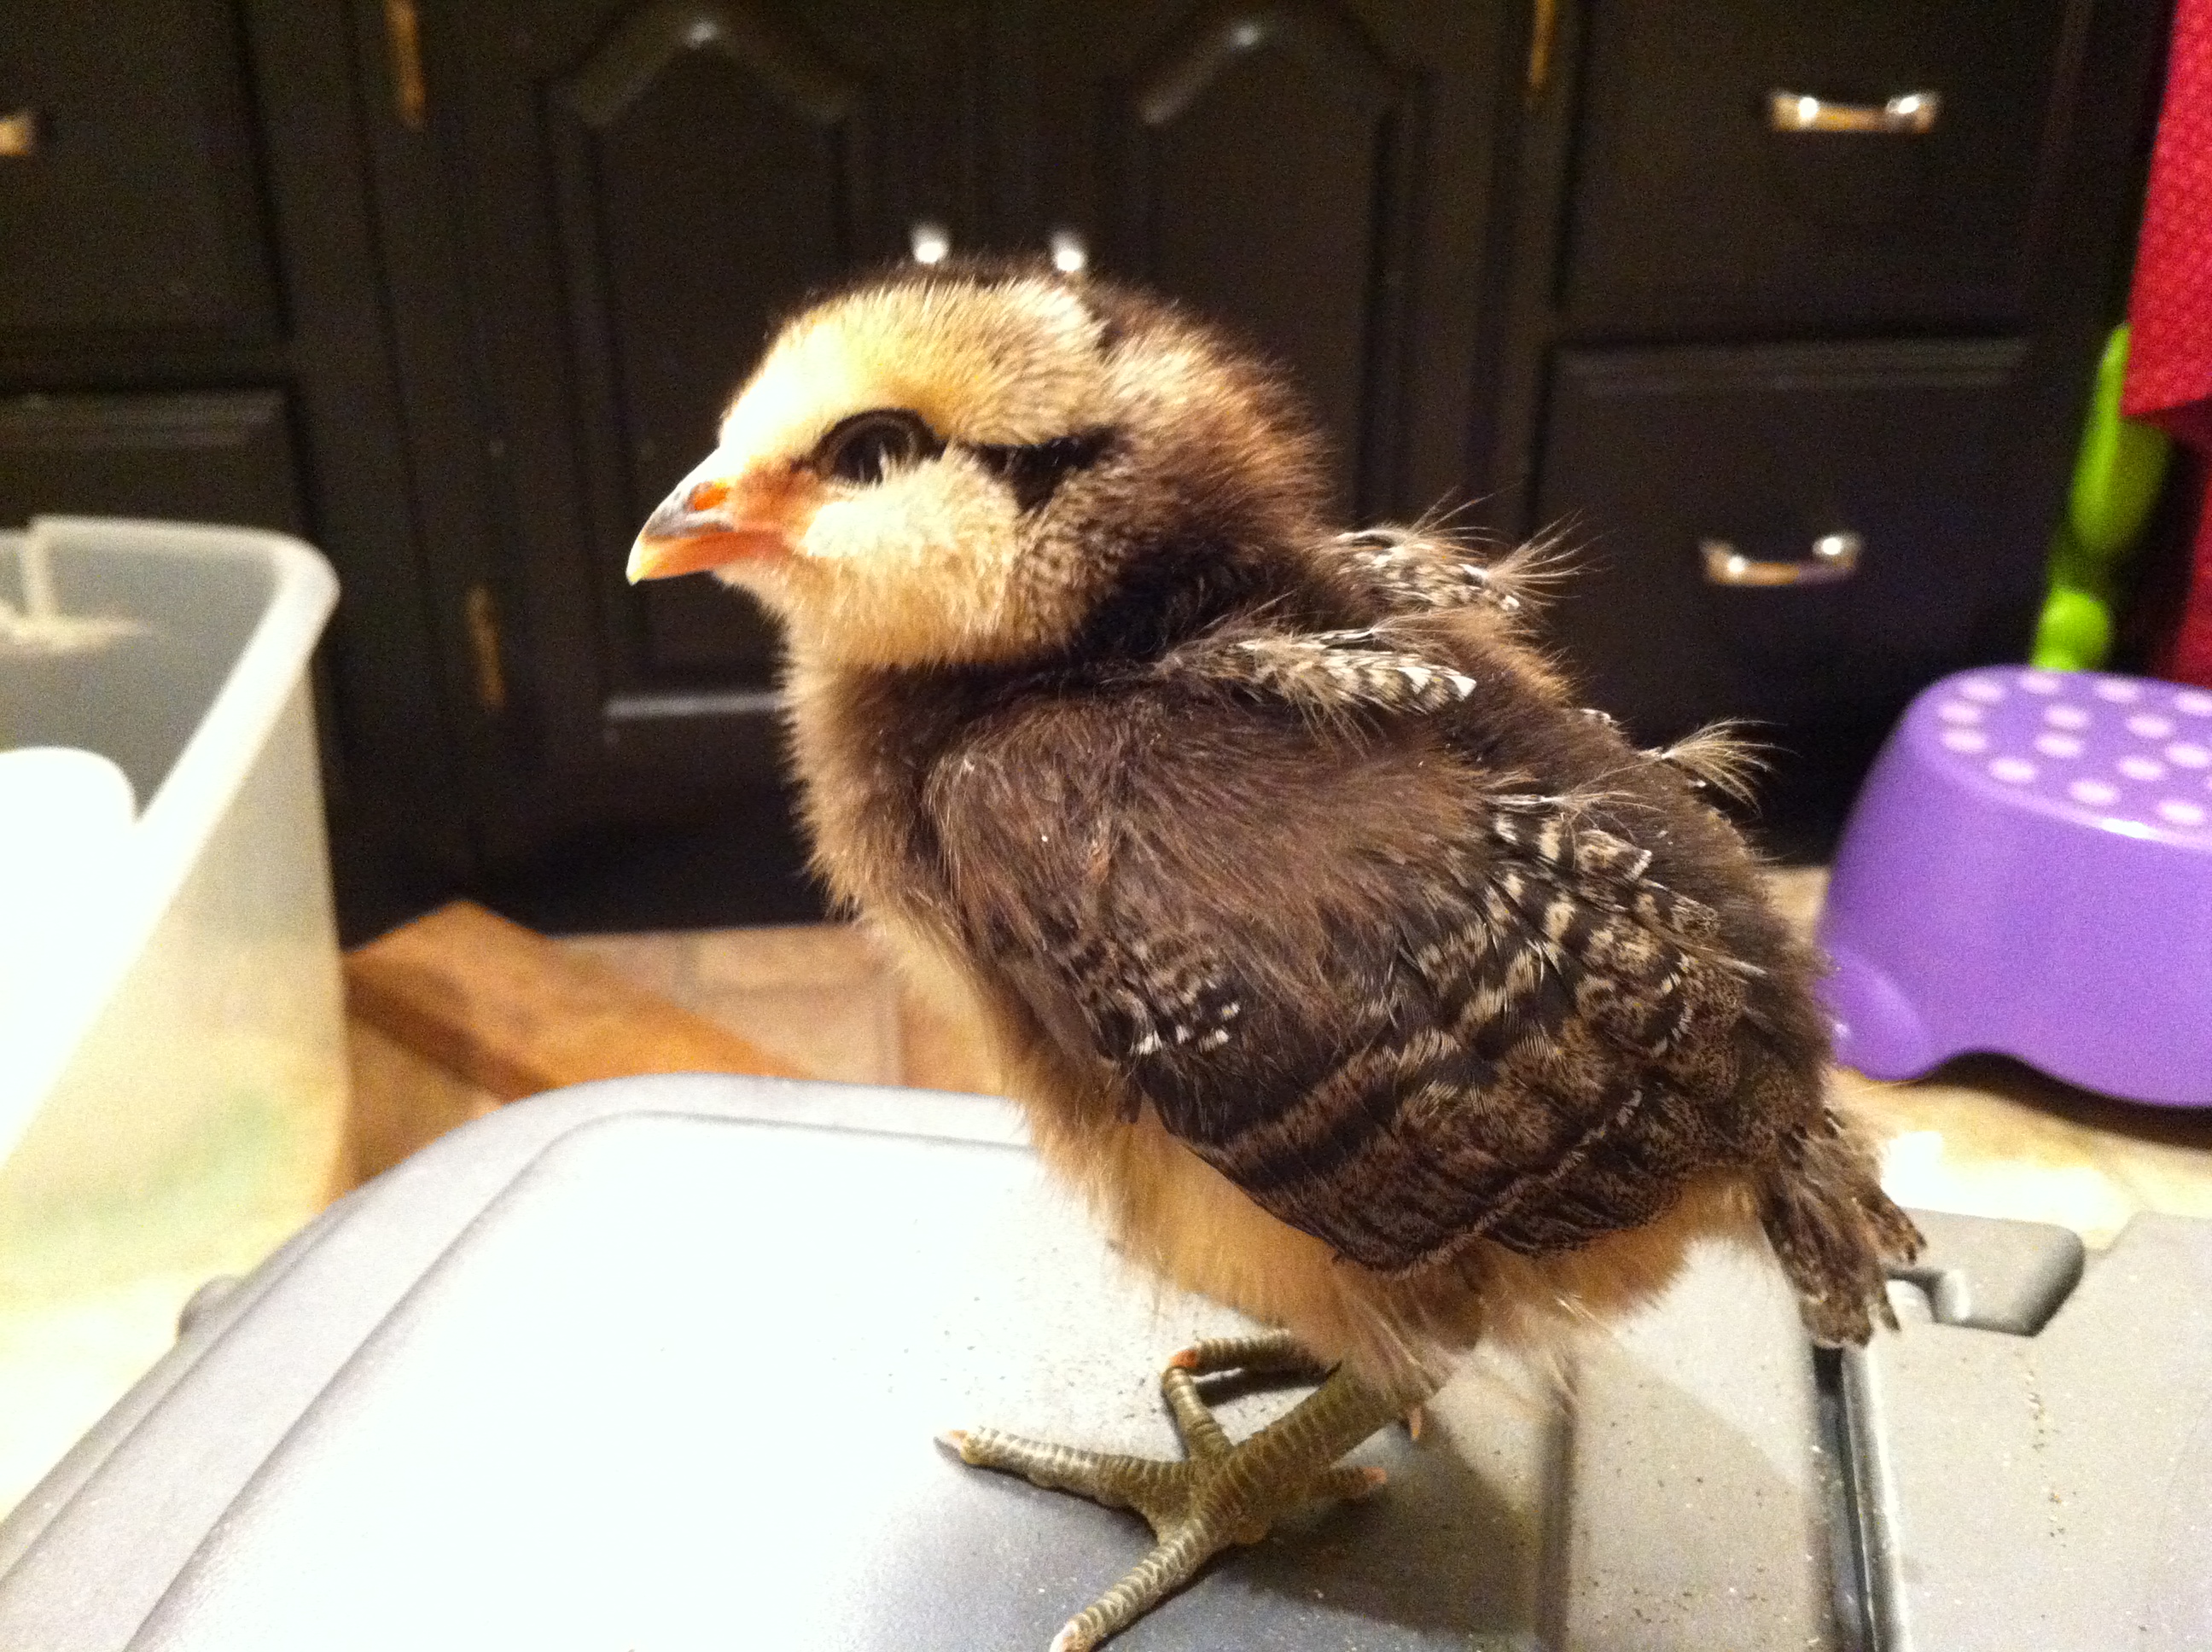 Chick 1 is yellow and black with black legs.  Very fluffy face and very outgoing.